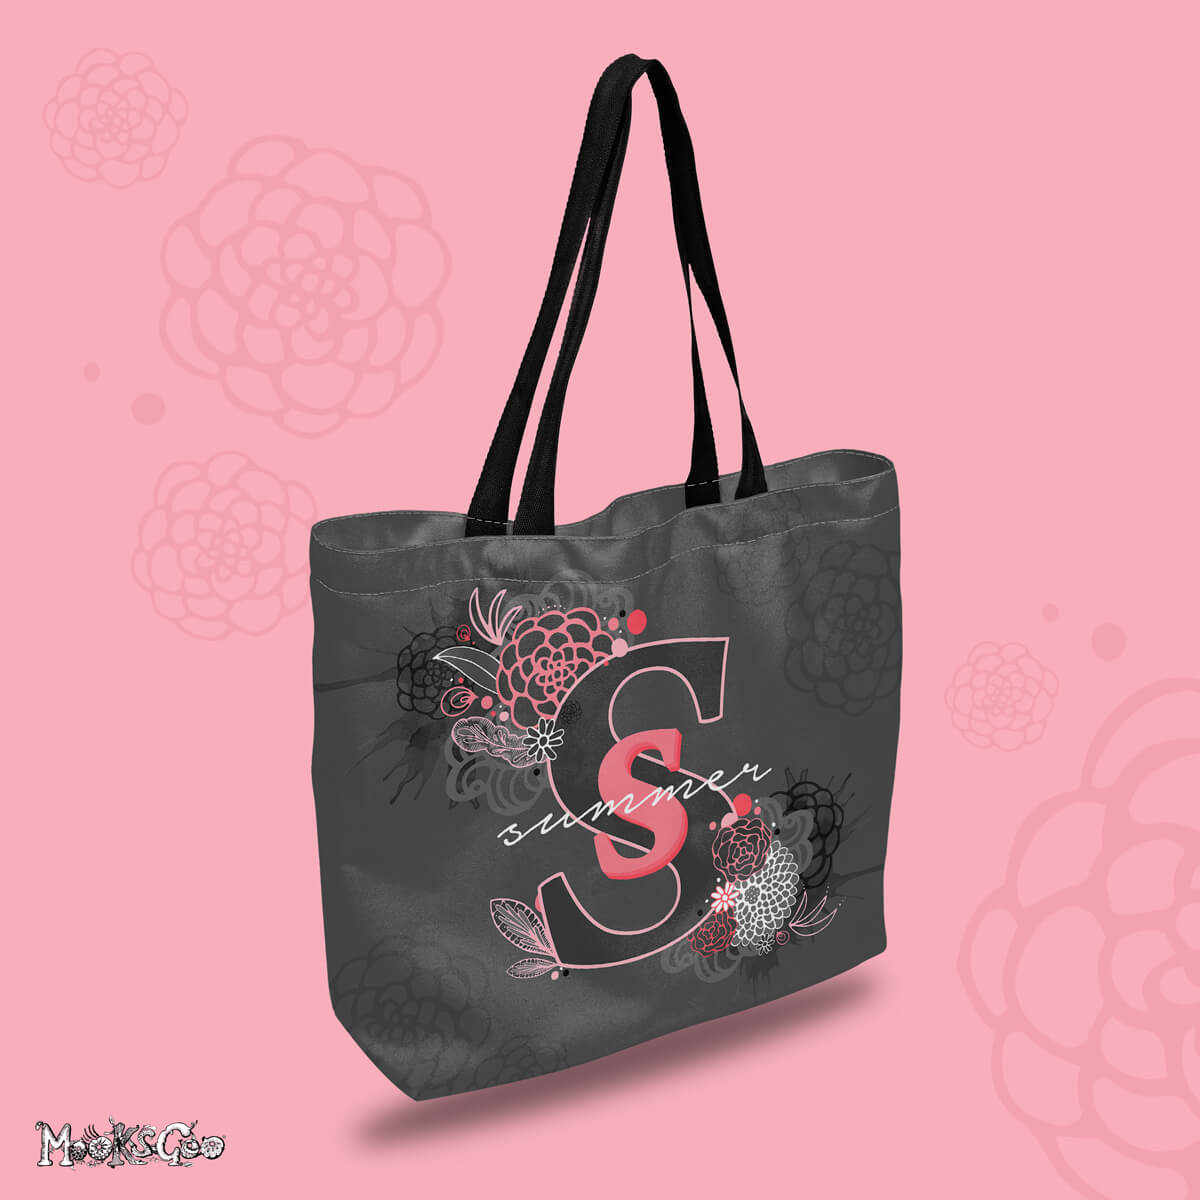 Personalised canvas tote bag with the name Summer, in a grey and pink colour palette, designed by MooksGoo